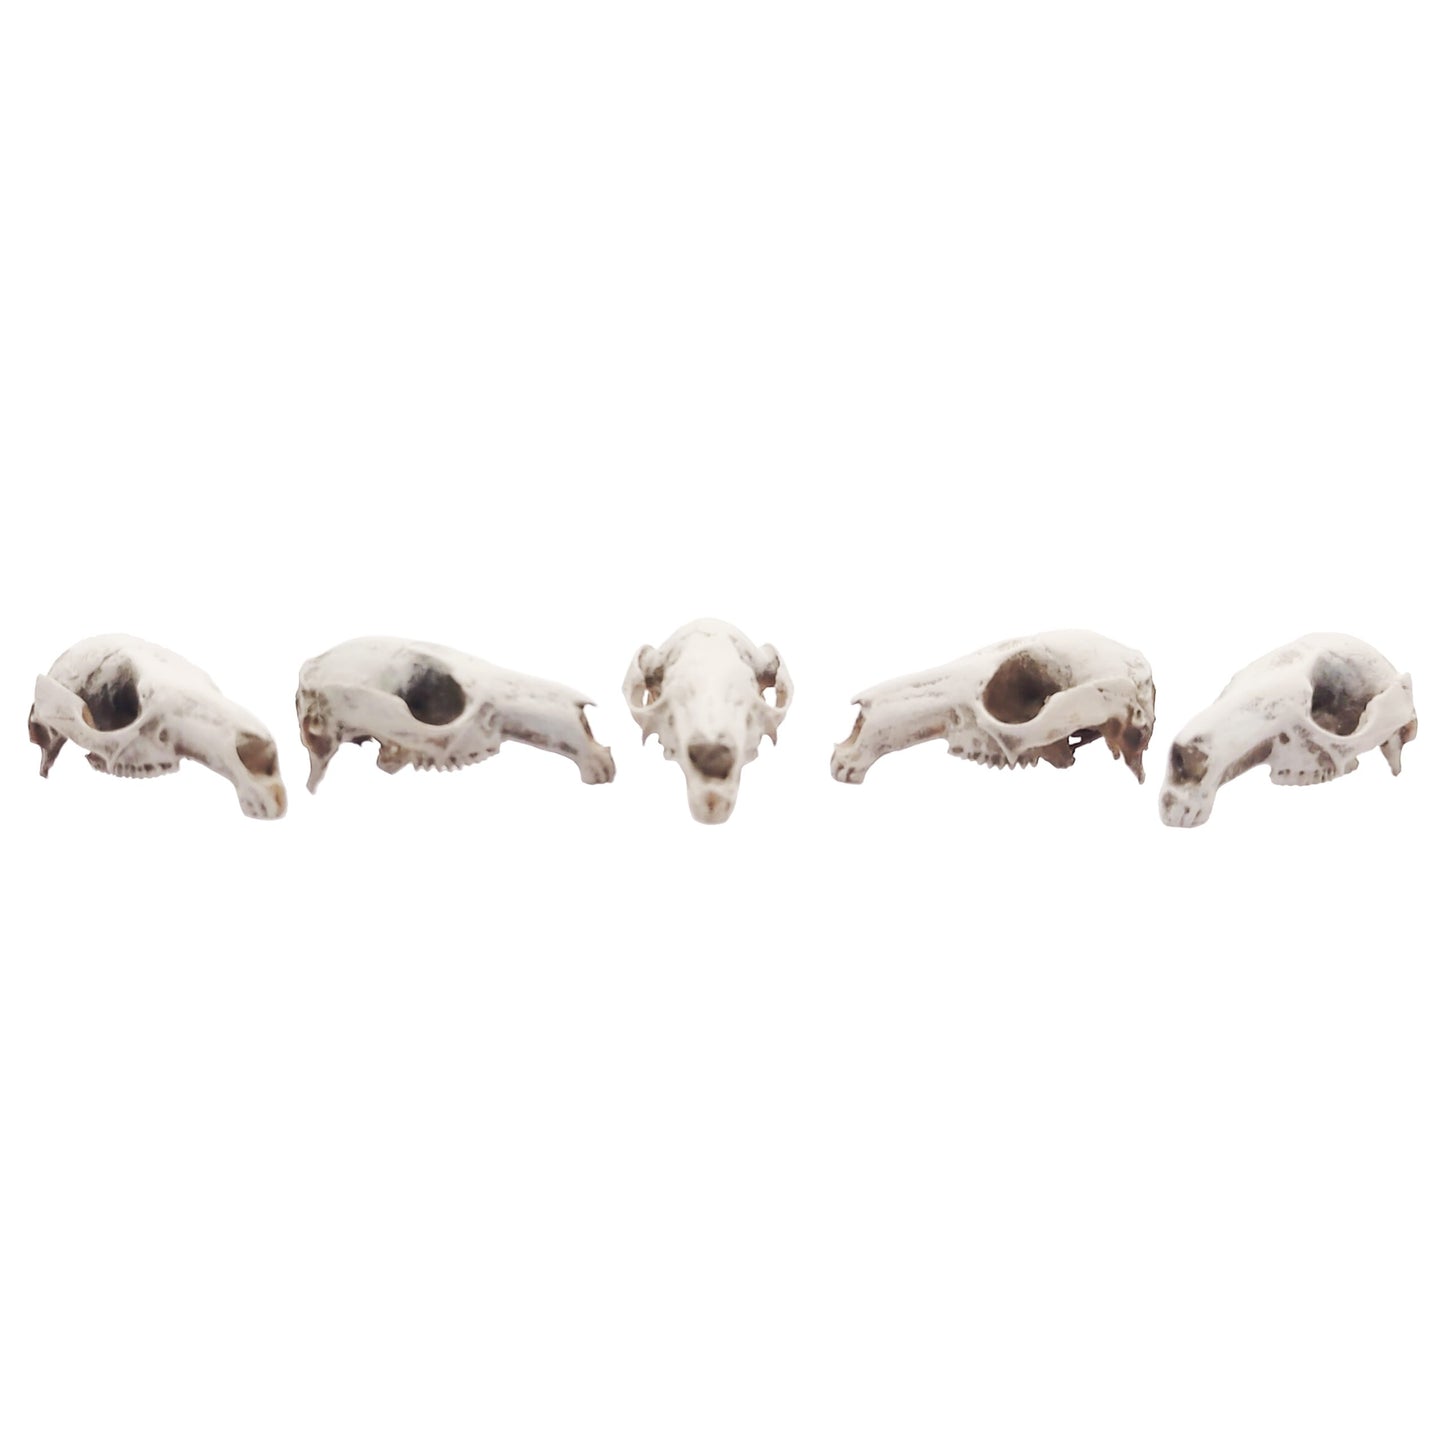 Red-necked Wallaby Skull Replica